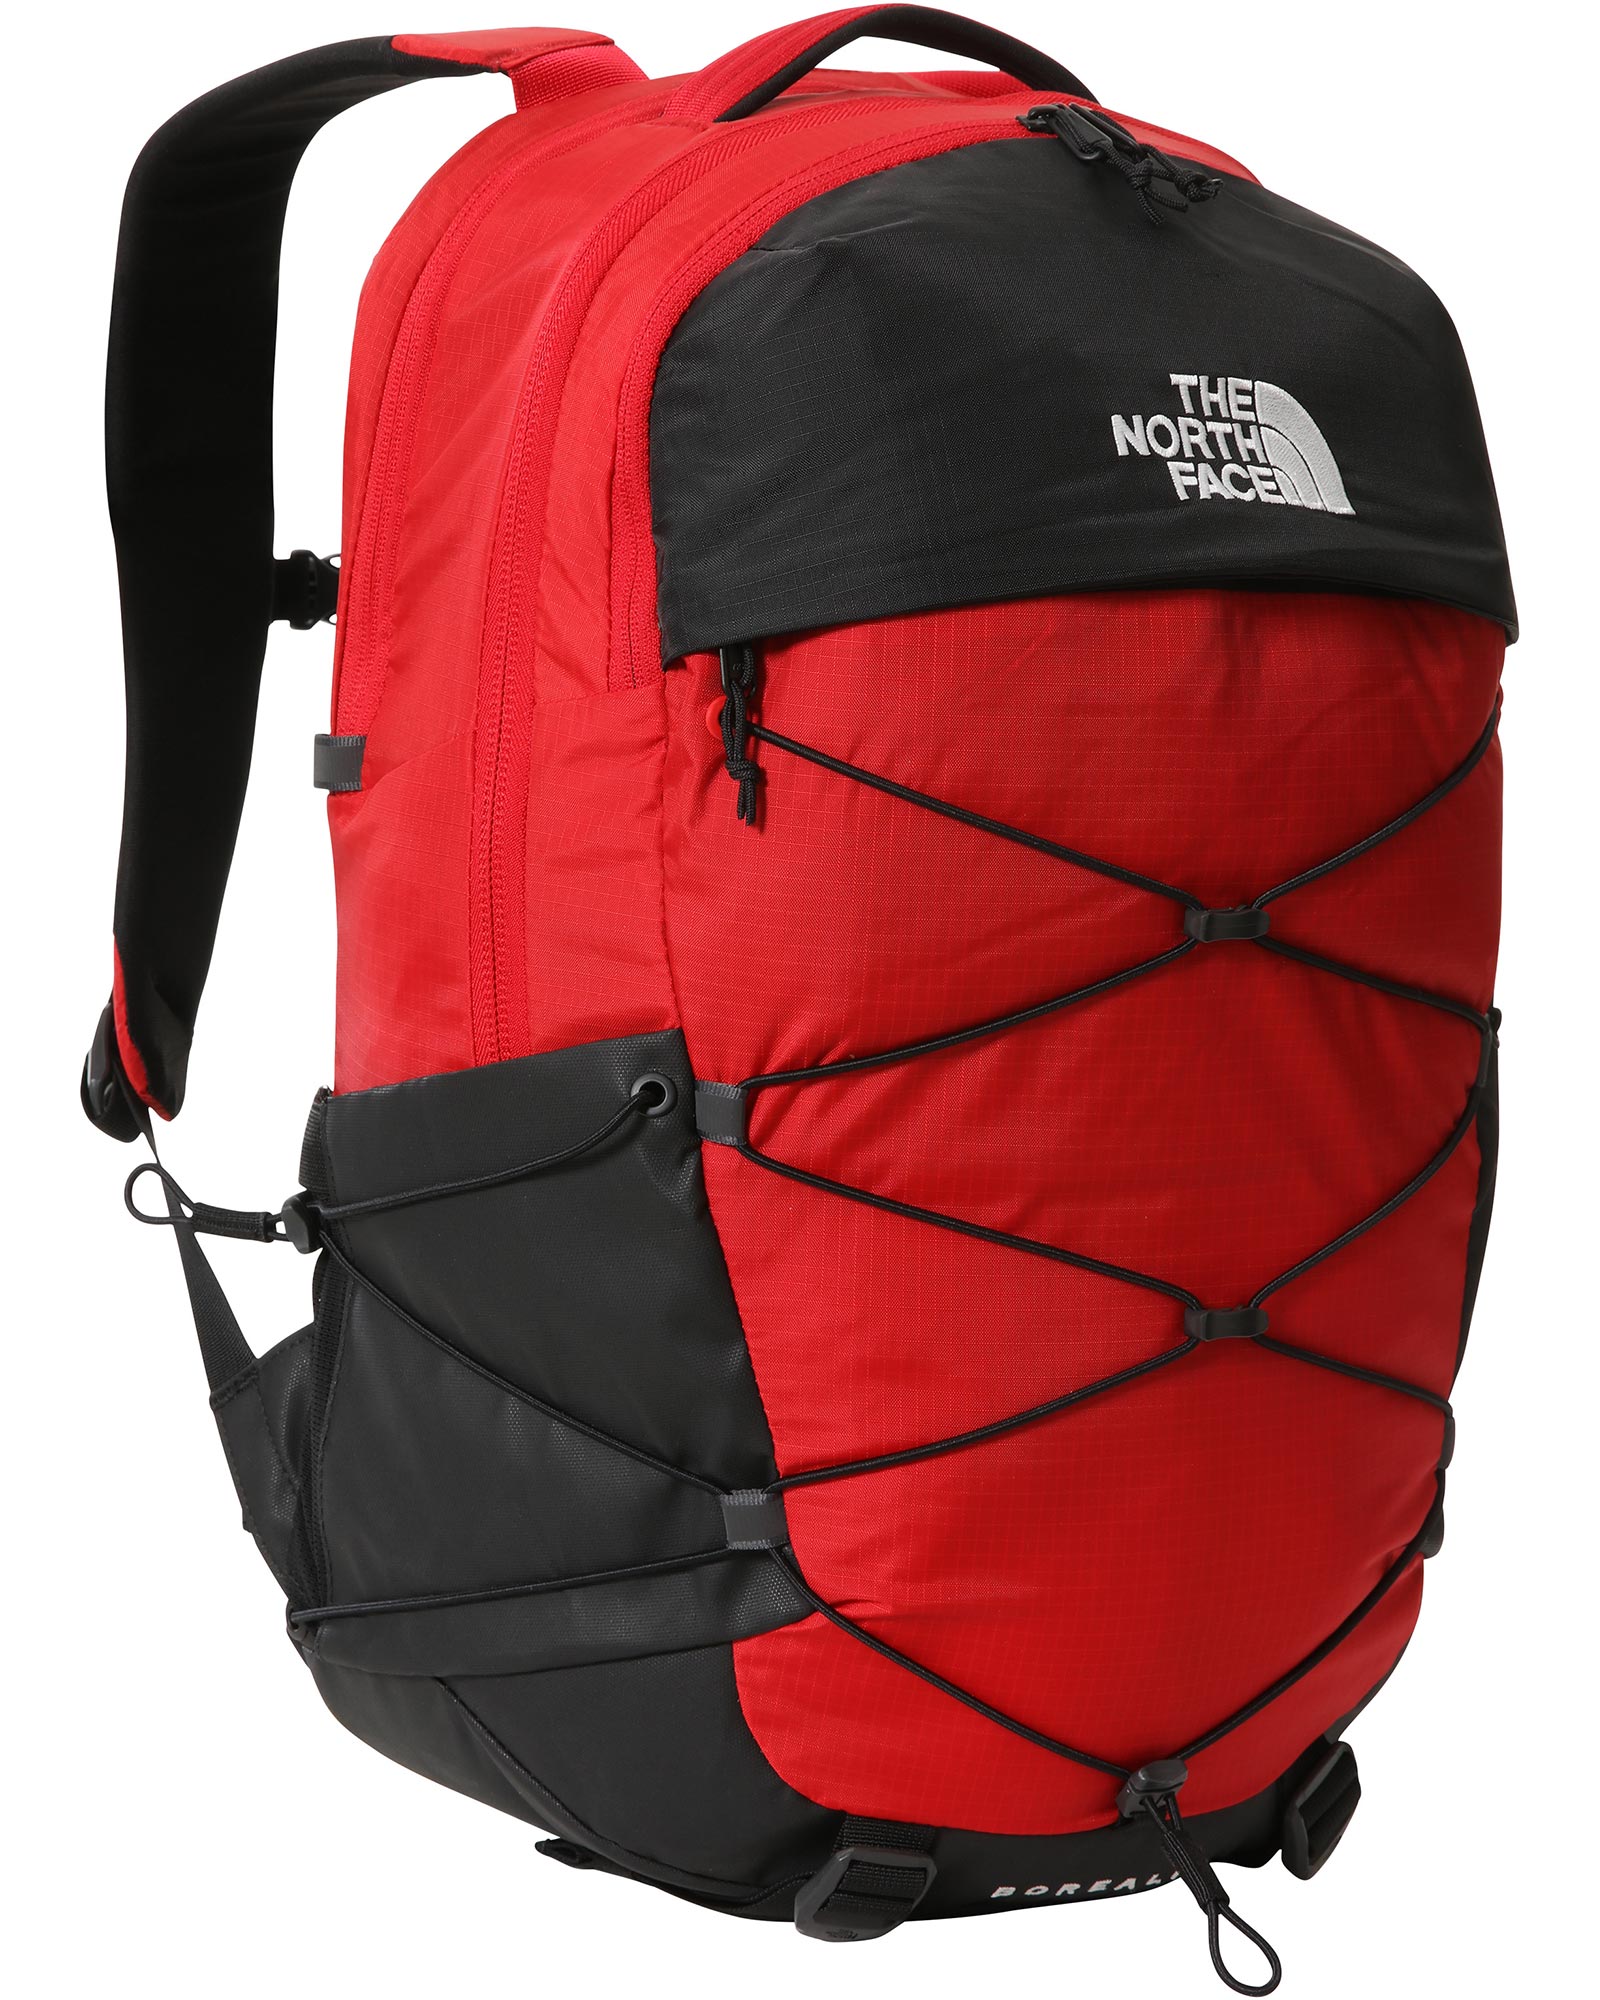 The North Face Borealis Backpack - Fiery Red Dip Dye Large Print/TNF Black